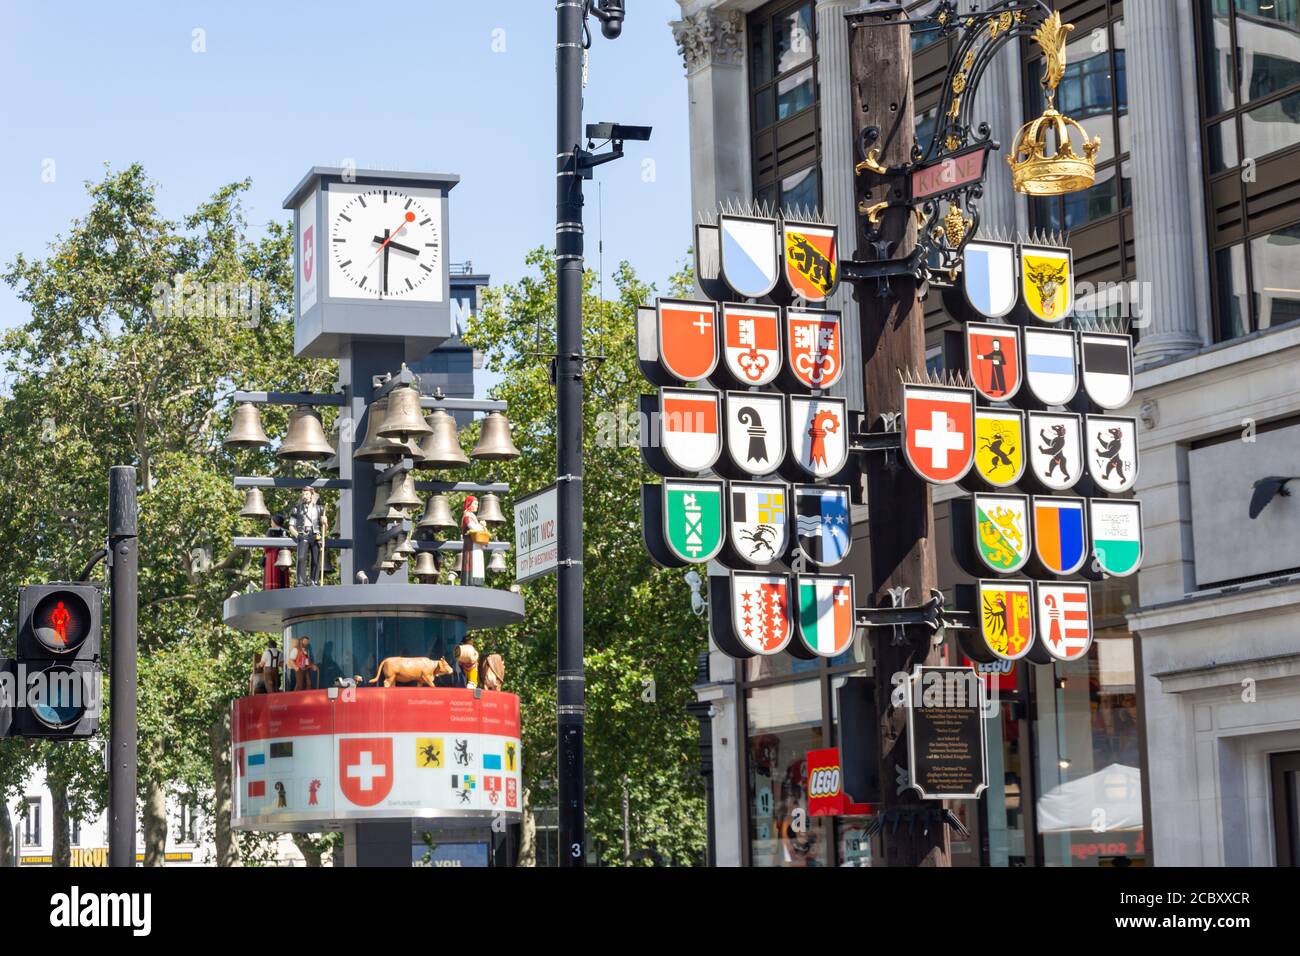 The Swiss Cantonal Tree, Swiss Court, City of Westminster, Greater London, England, United Kingdom Foto Stock